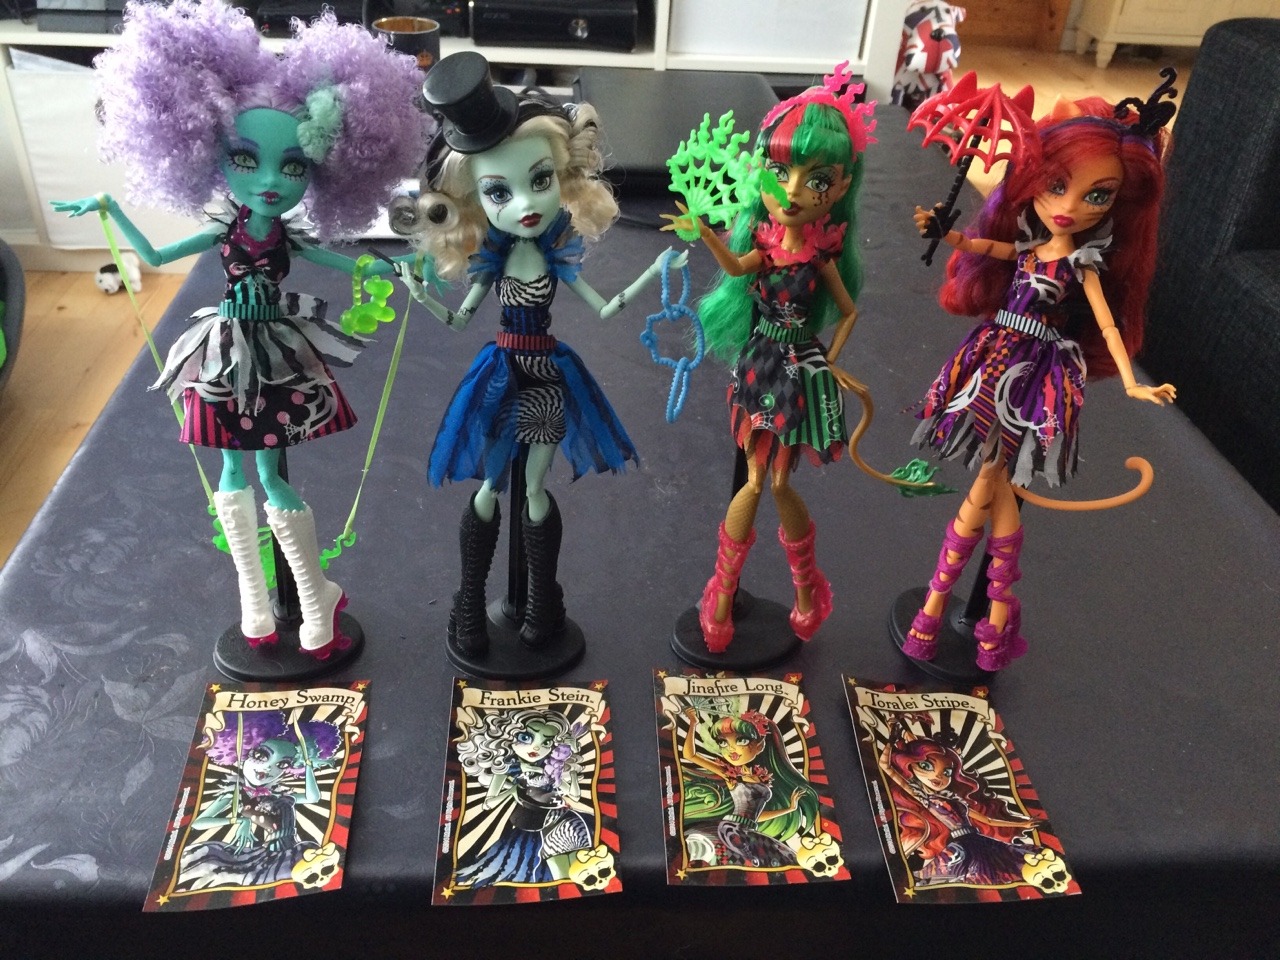 monstergazette:

They are finally here!!!  Gooliope is on her way.  Next up: Twyla, Clawdeen and play set!